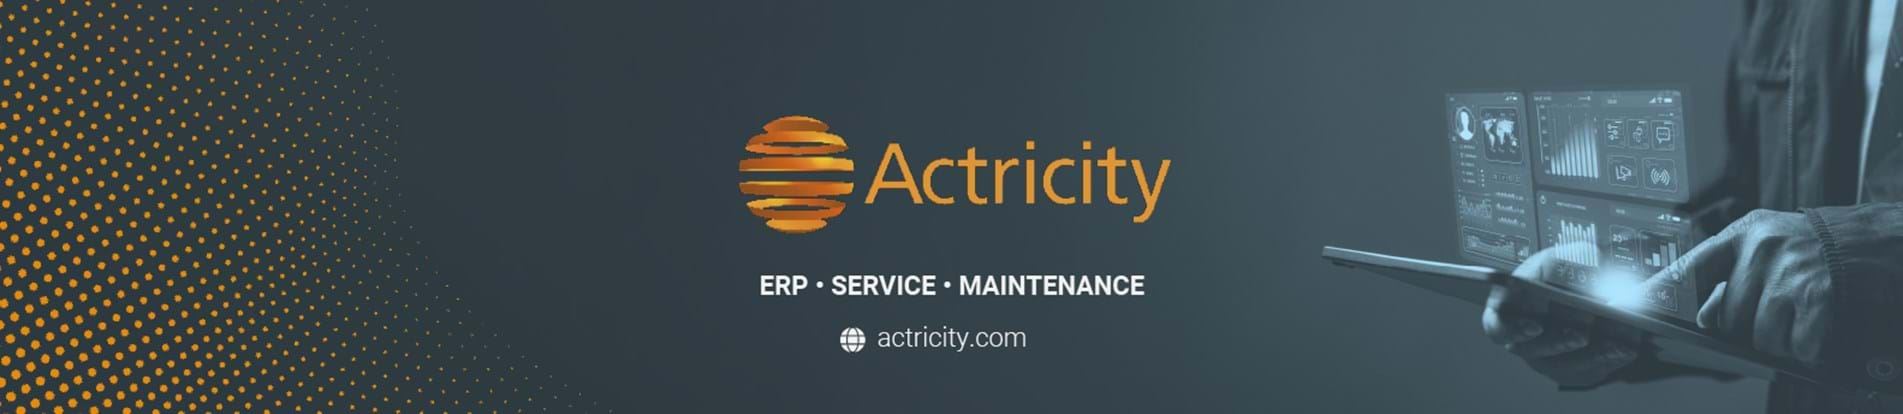 Actricity AG logo